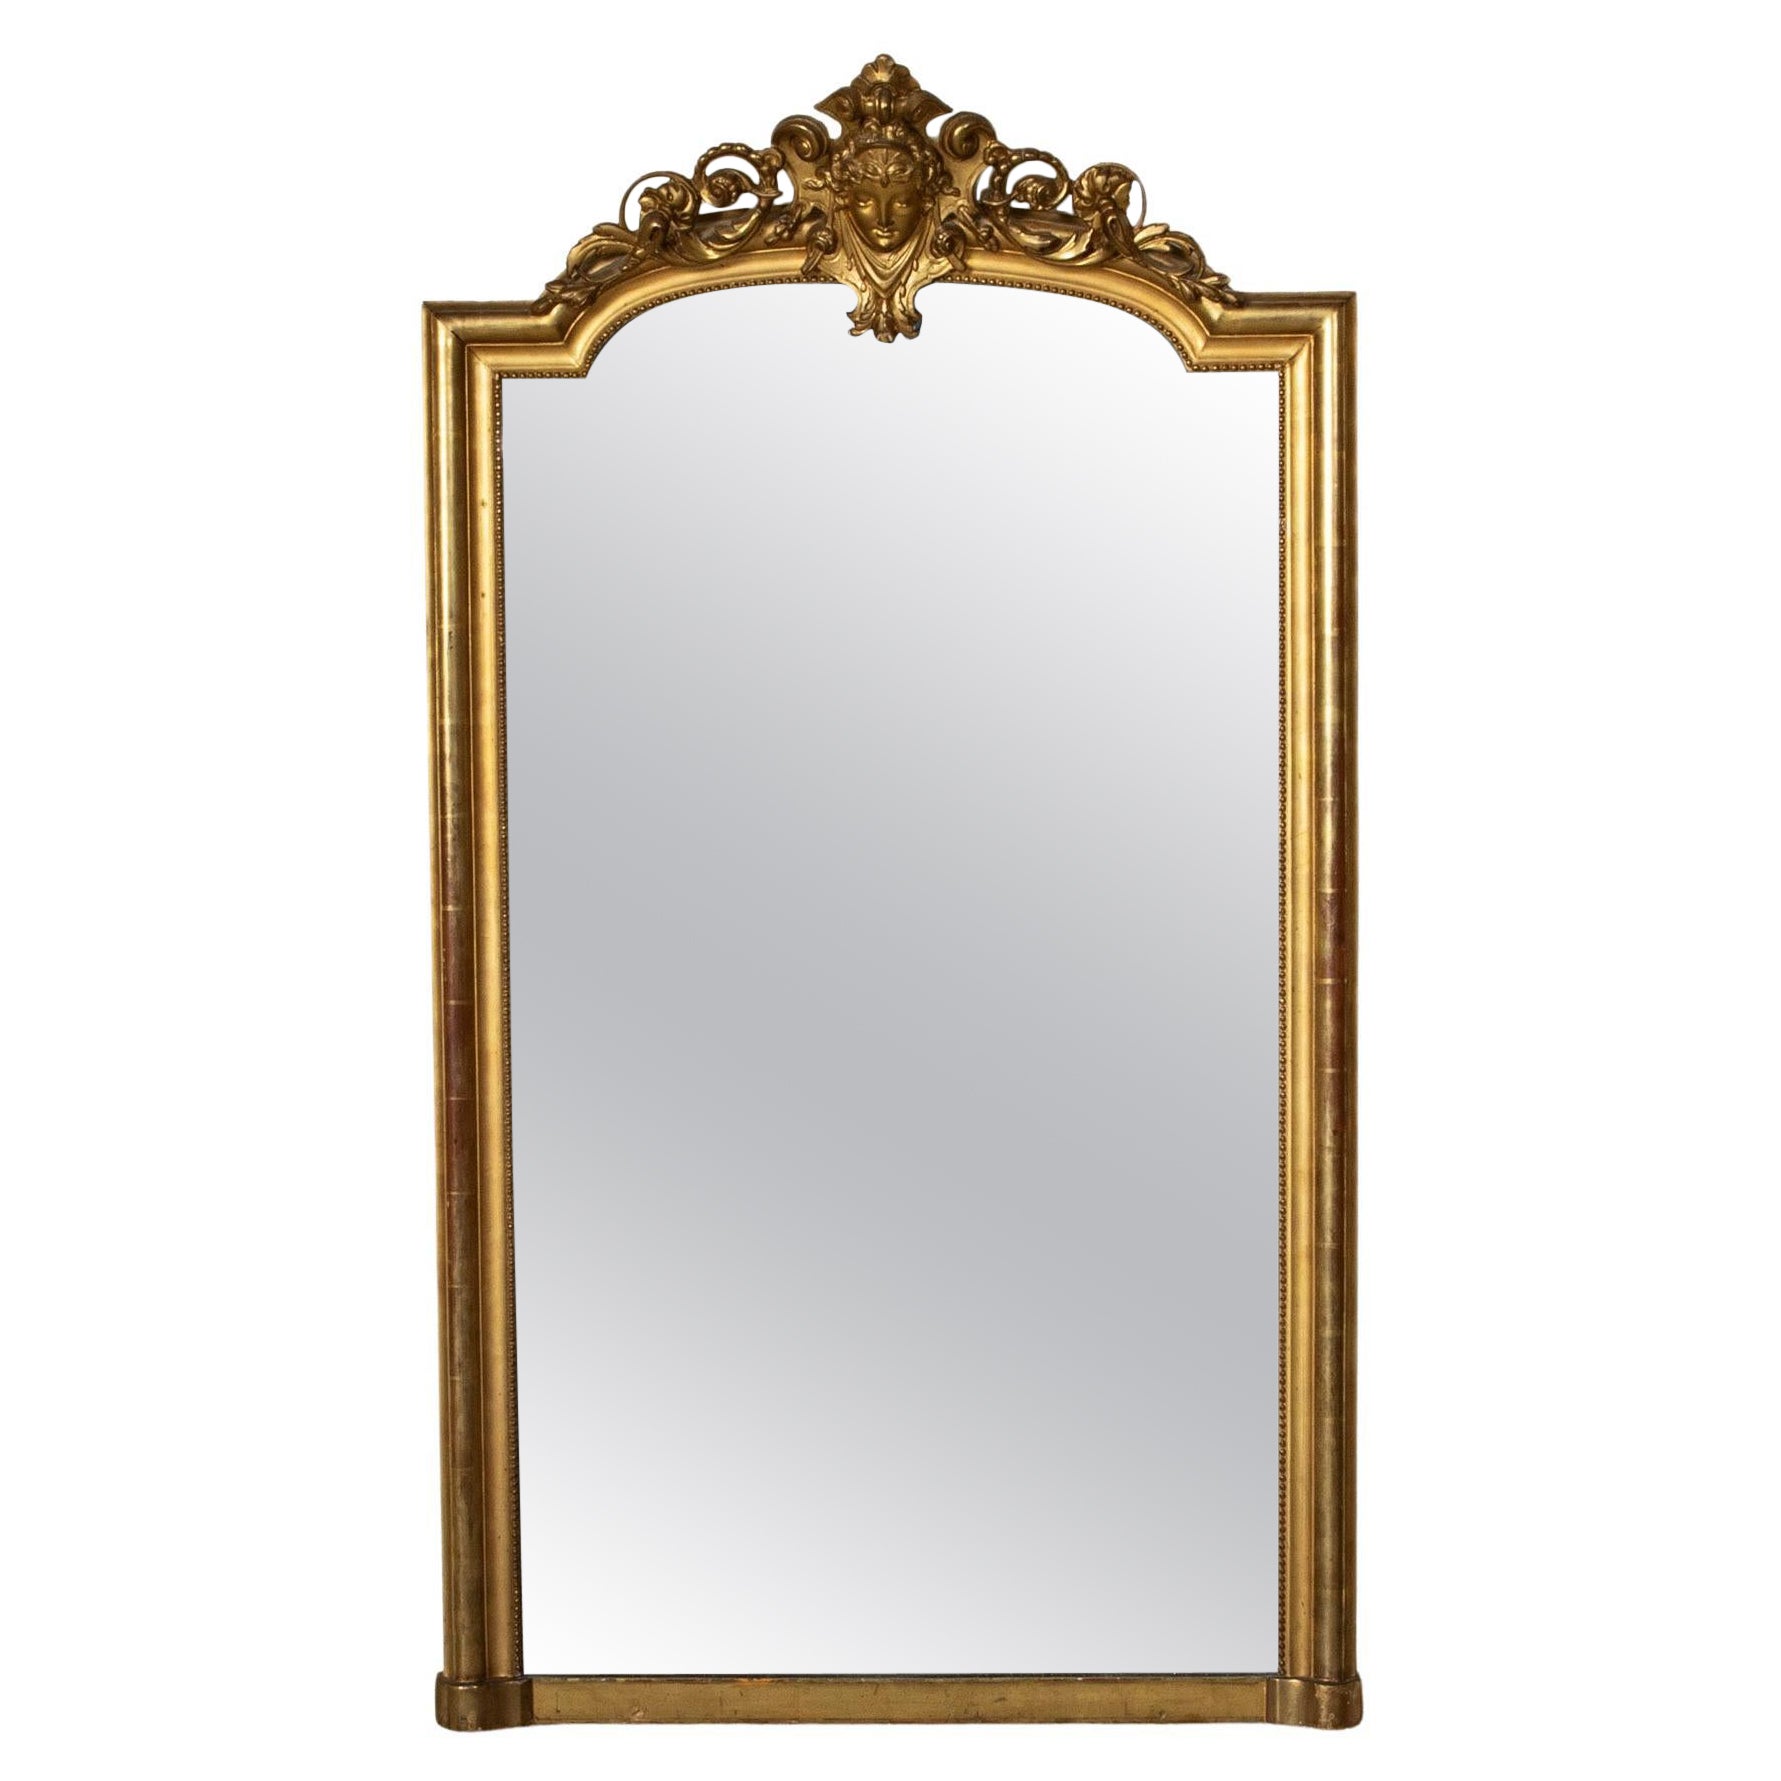 Mid-19th Century Napoleon III Period French Gilt Wood Mantel Mirror with Mask